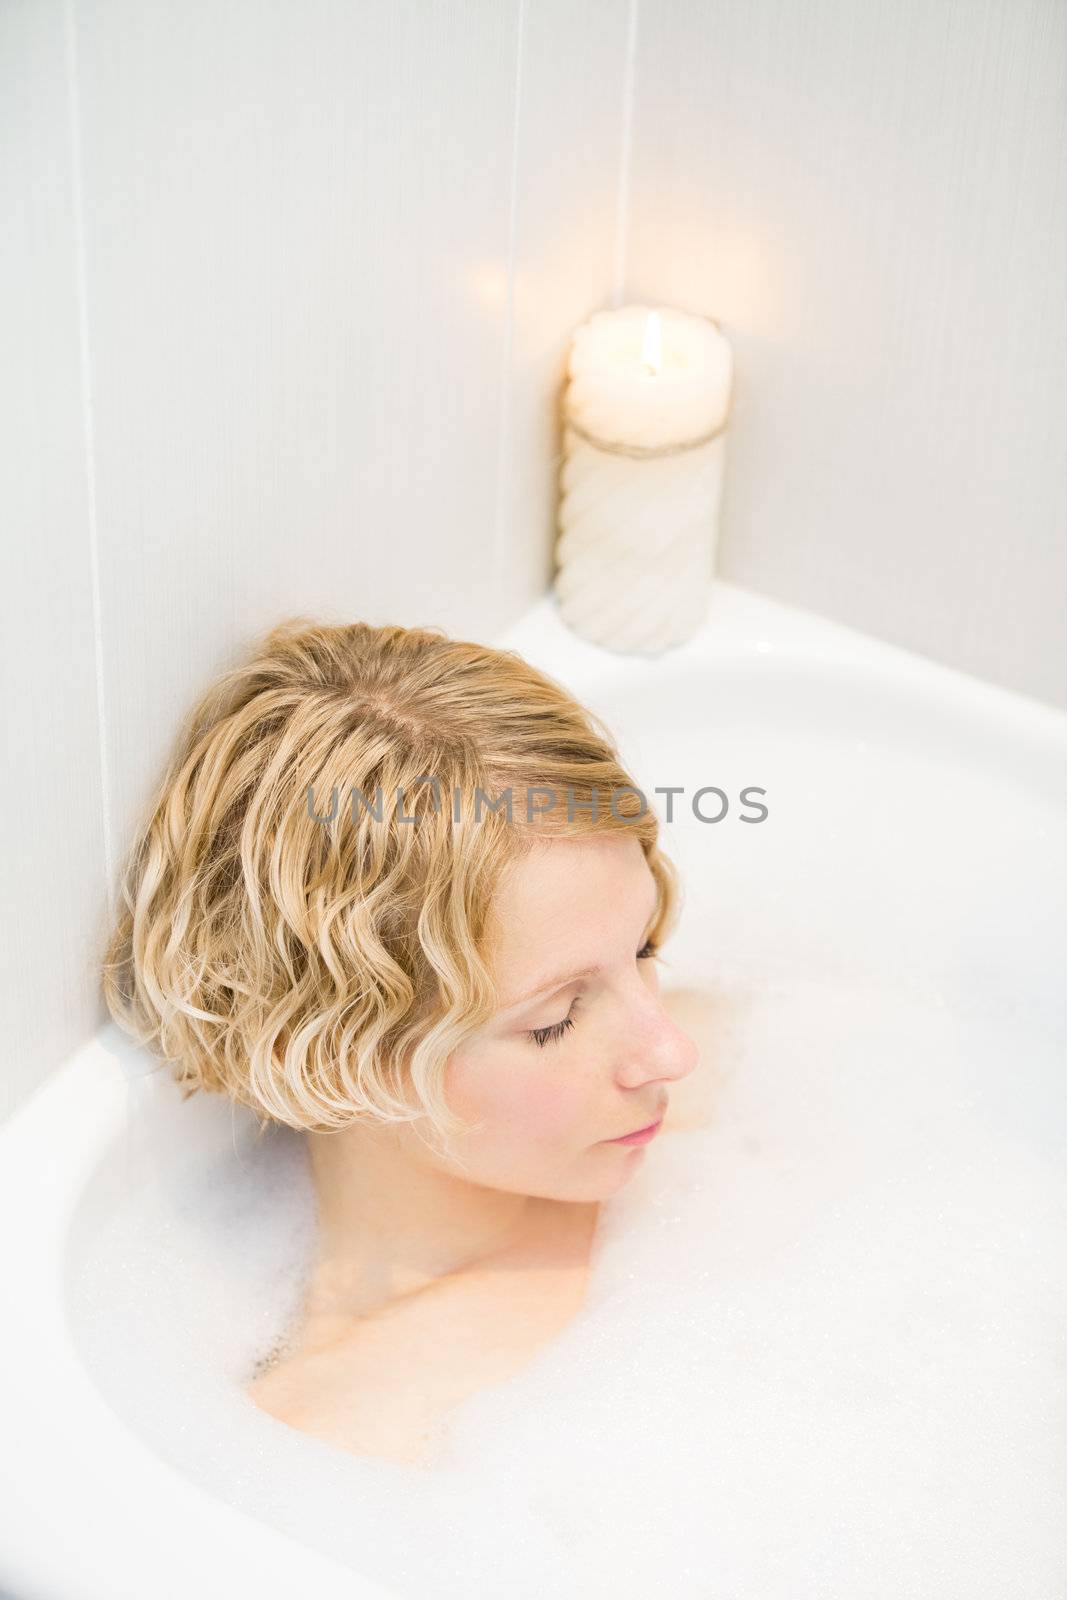 Young woman relaxing in the bath by aetb